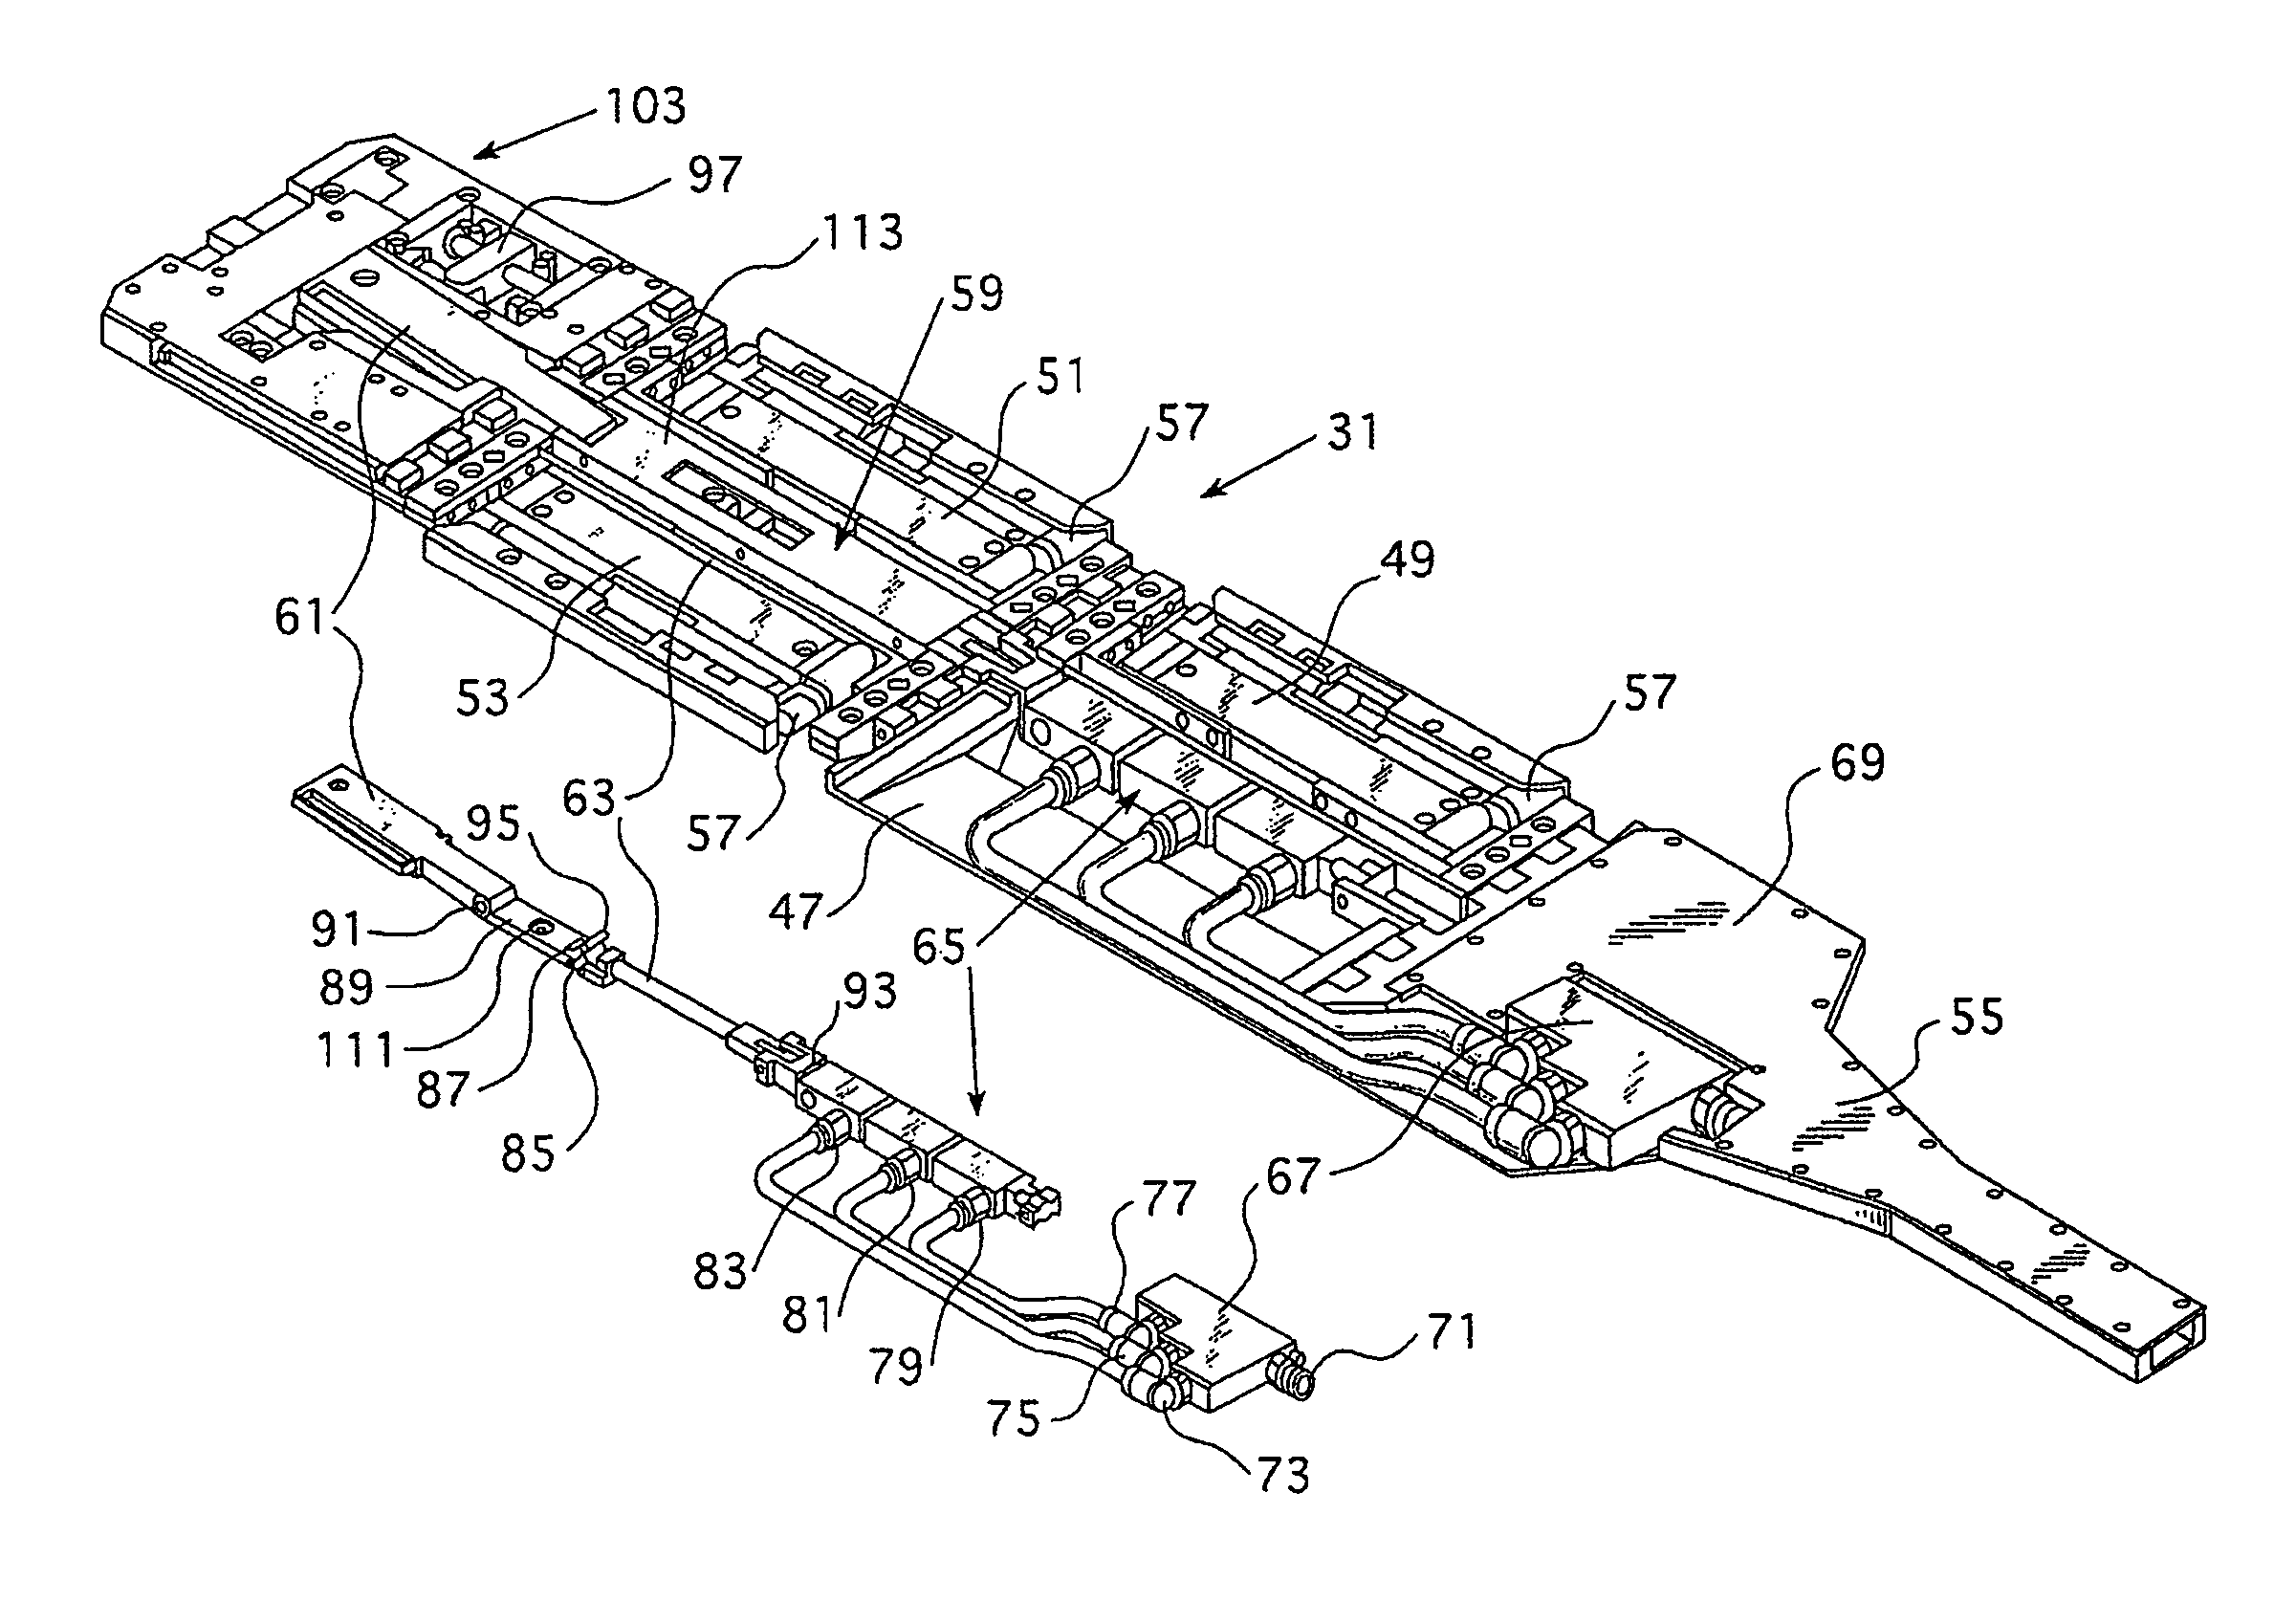 Apparatus for impact testing for electric generator stator wedge tightness